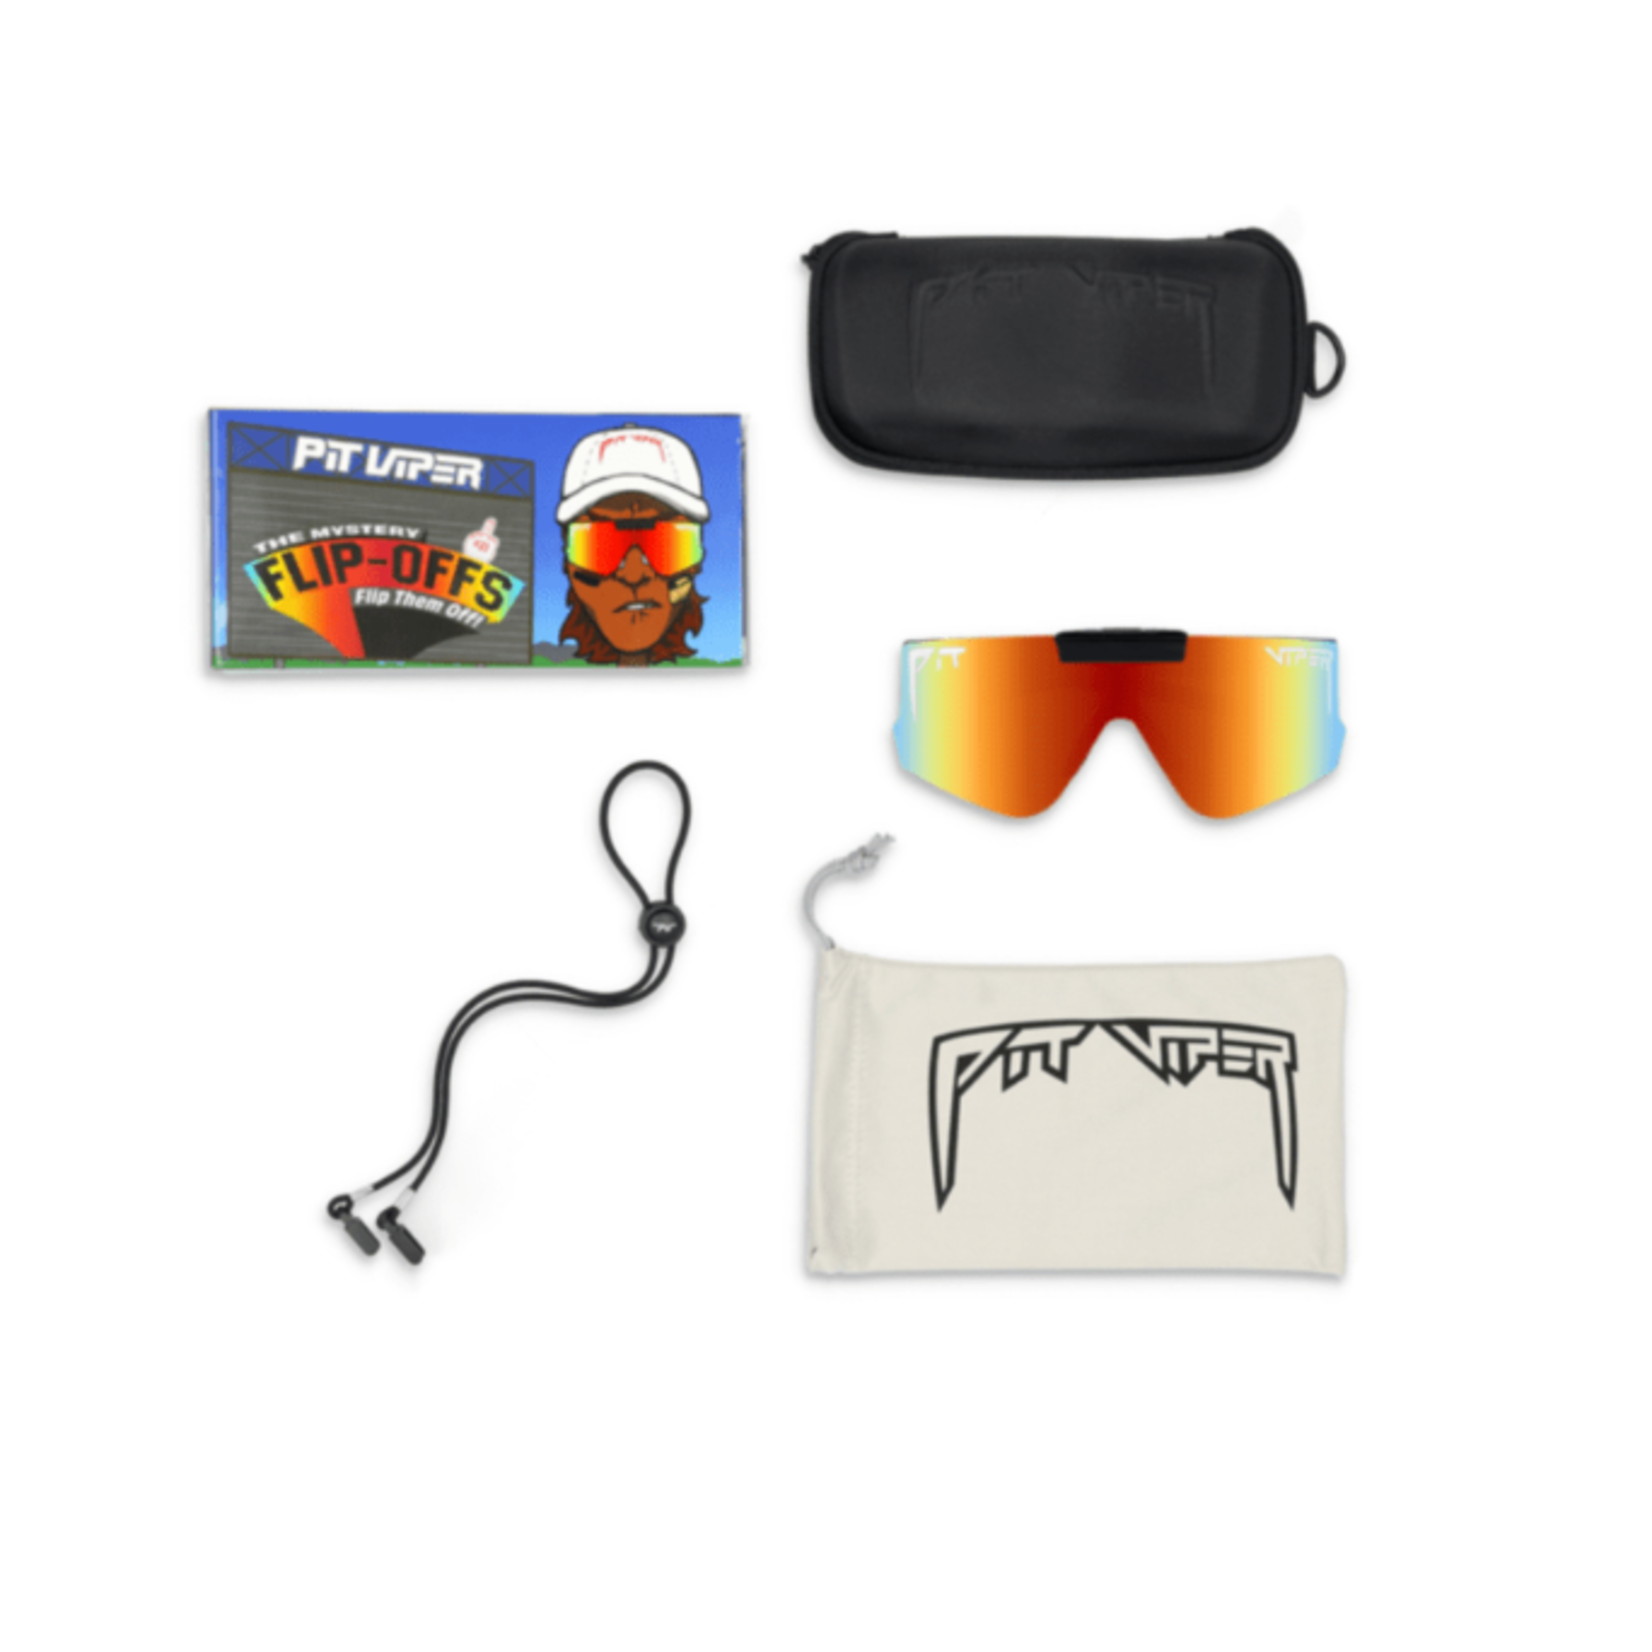 PIT VIPER The Flip-Offs The Mystery Polarized